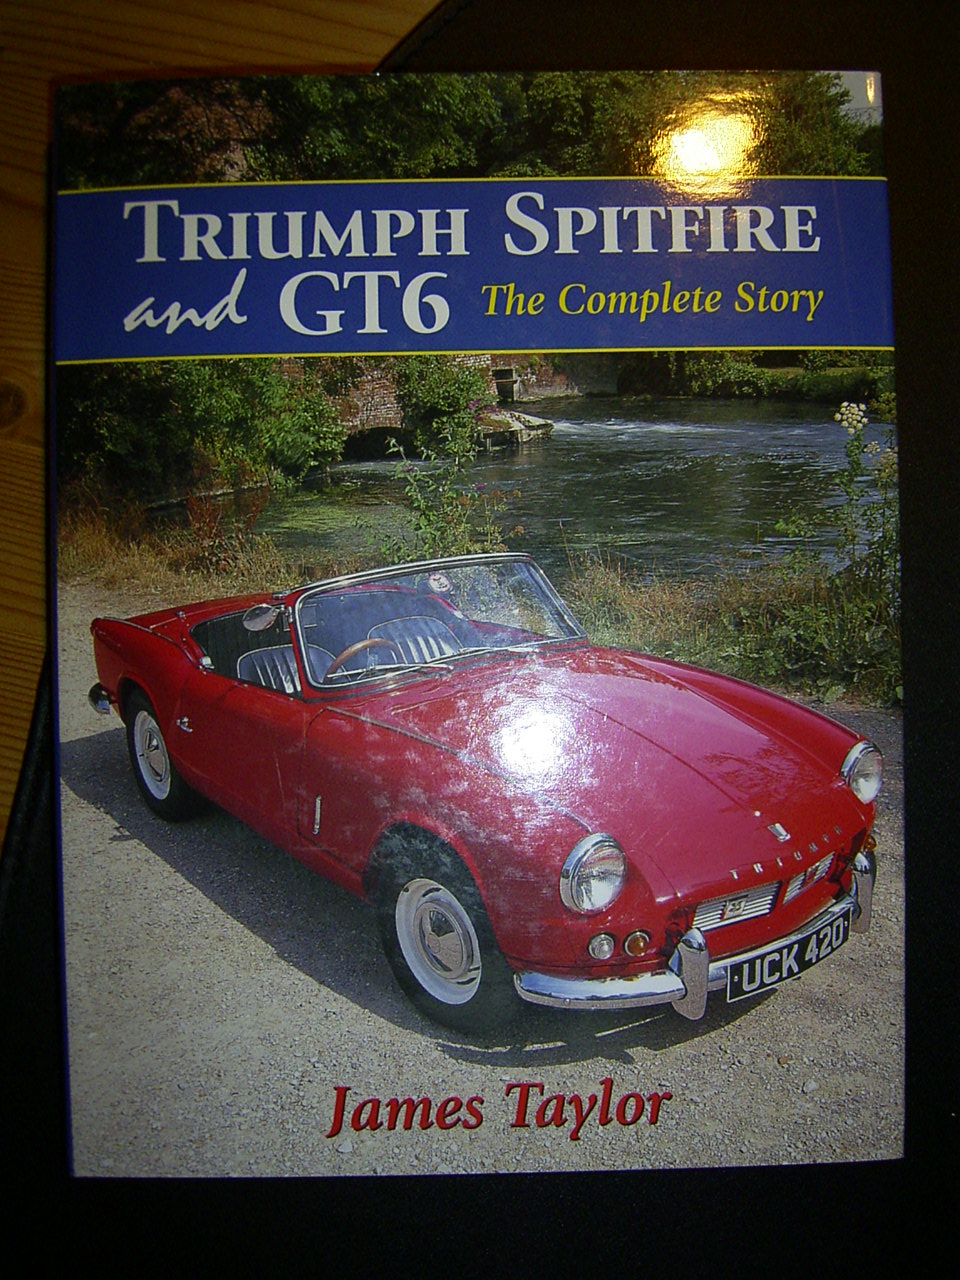 Triumph Spitfire and GT6 - The Complete Story (James Taylor) 